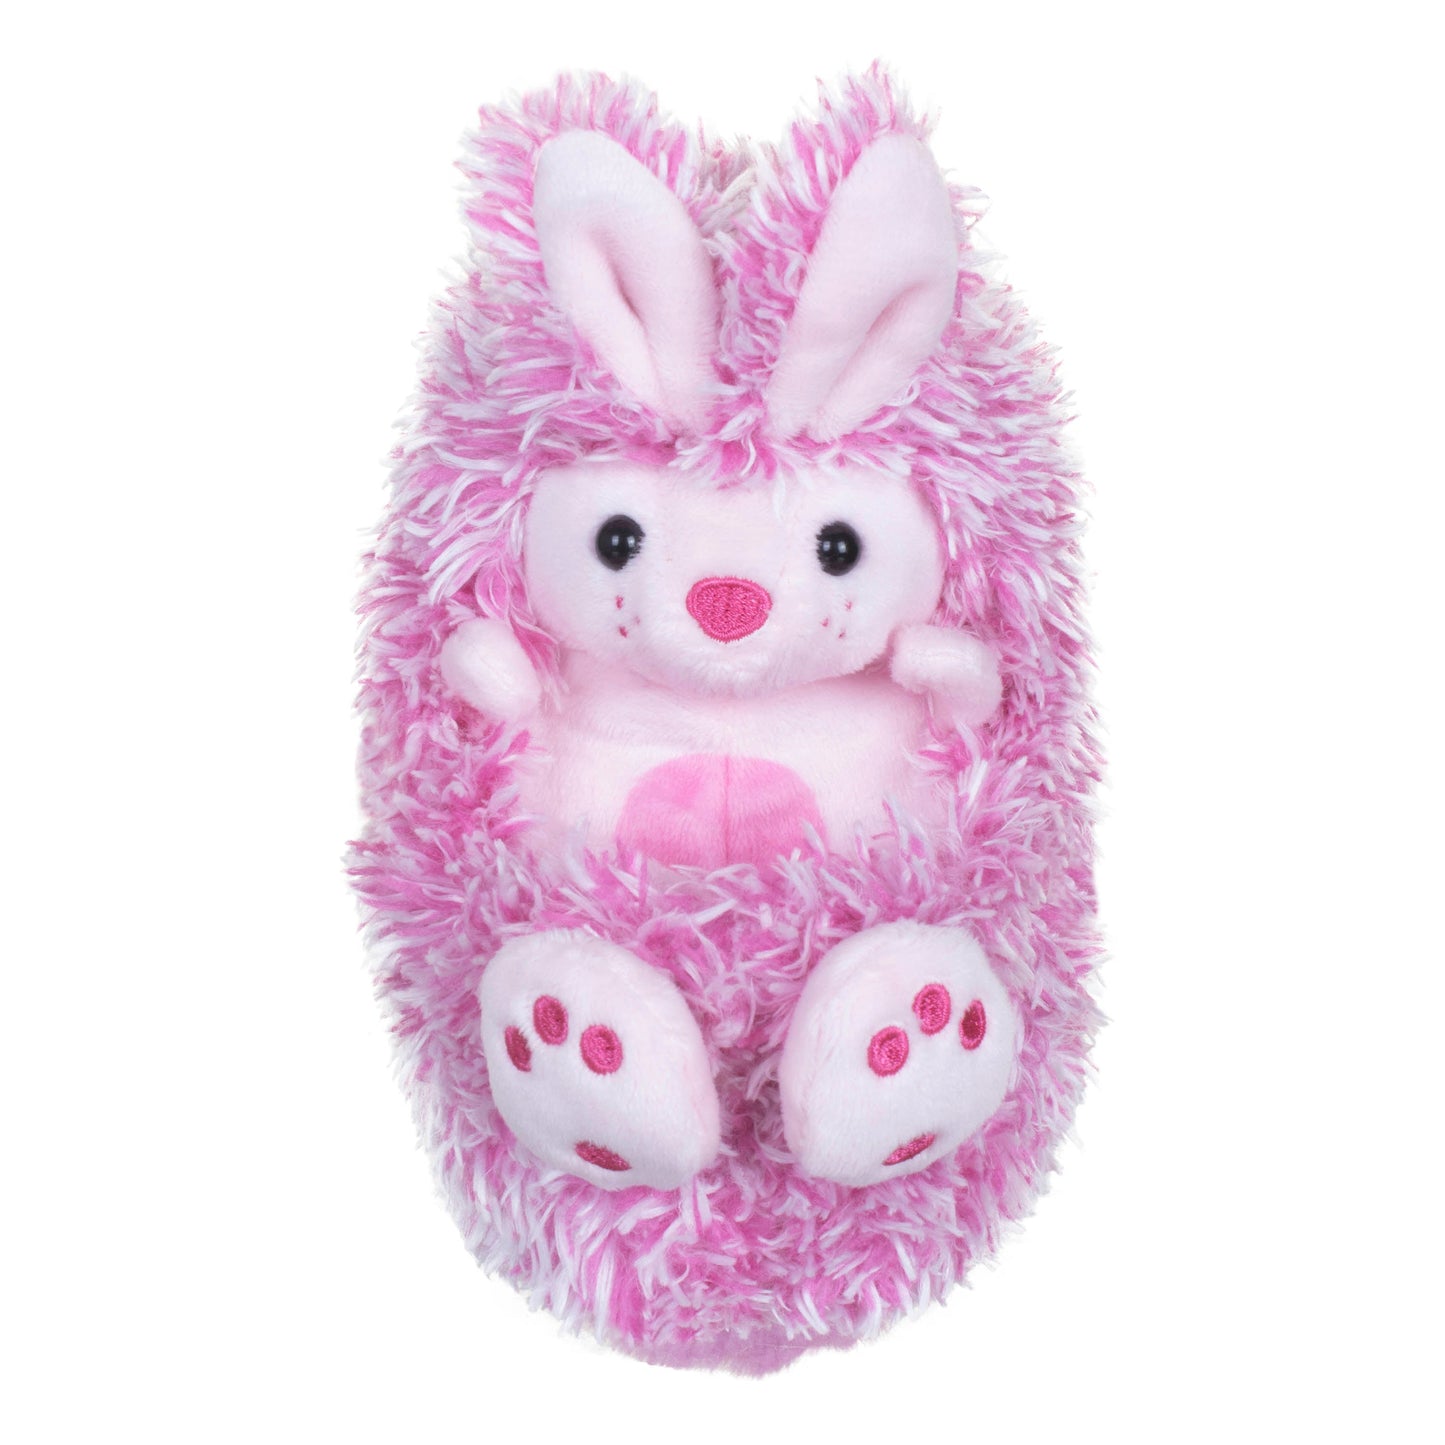 Curlimals Bibi The Bunny Interactive Plush Soft Toy for Kids